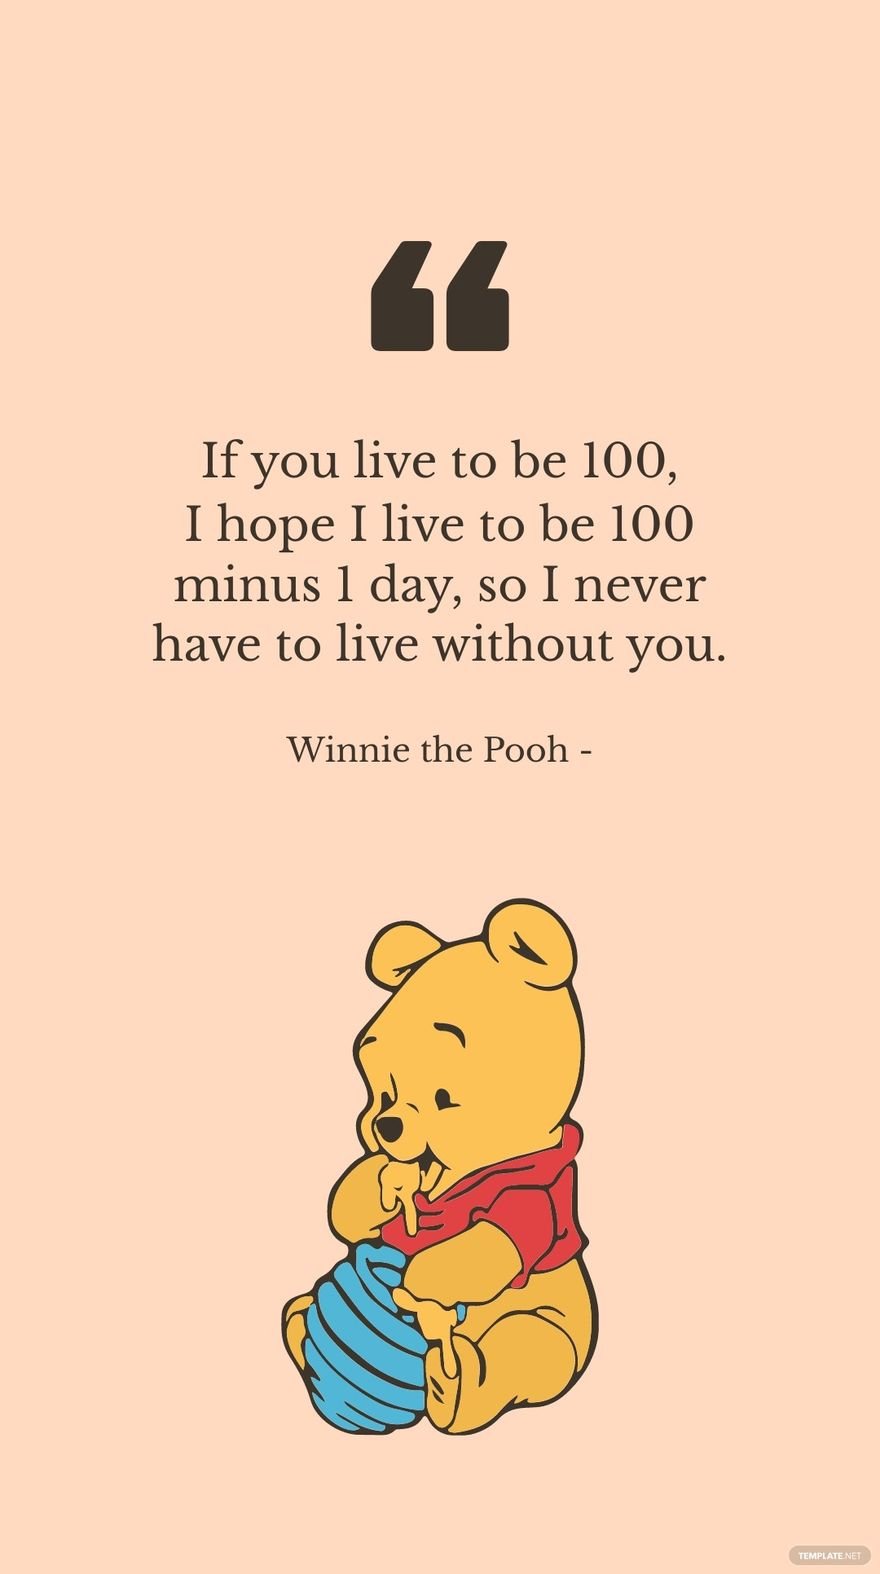 Free Winnie the Pooh - If you live to be 100, I hope I live to be 100 minus 1 day, so I never have to live without you. in JPG